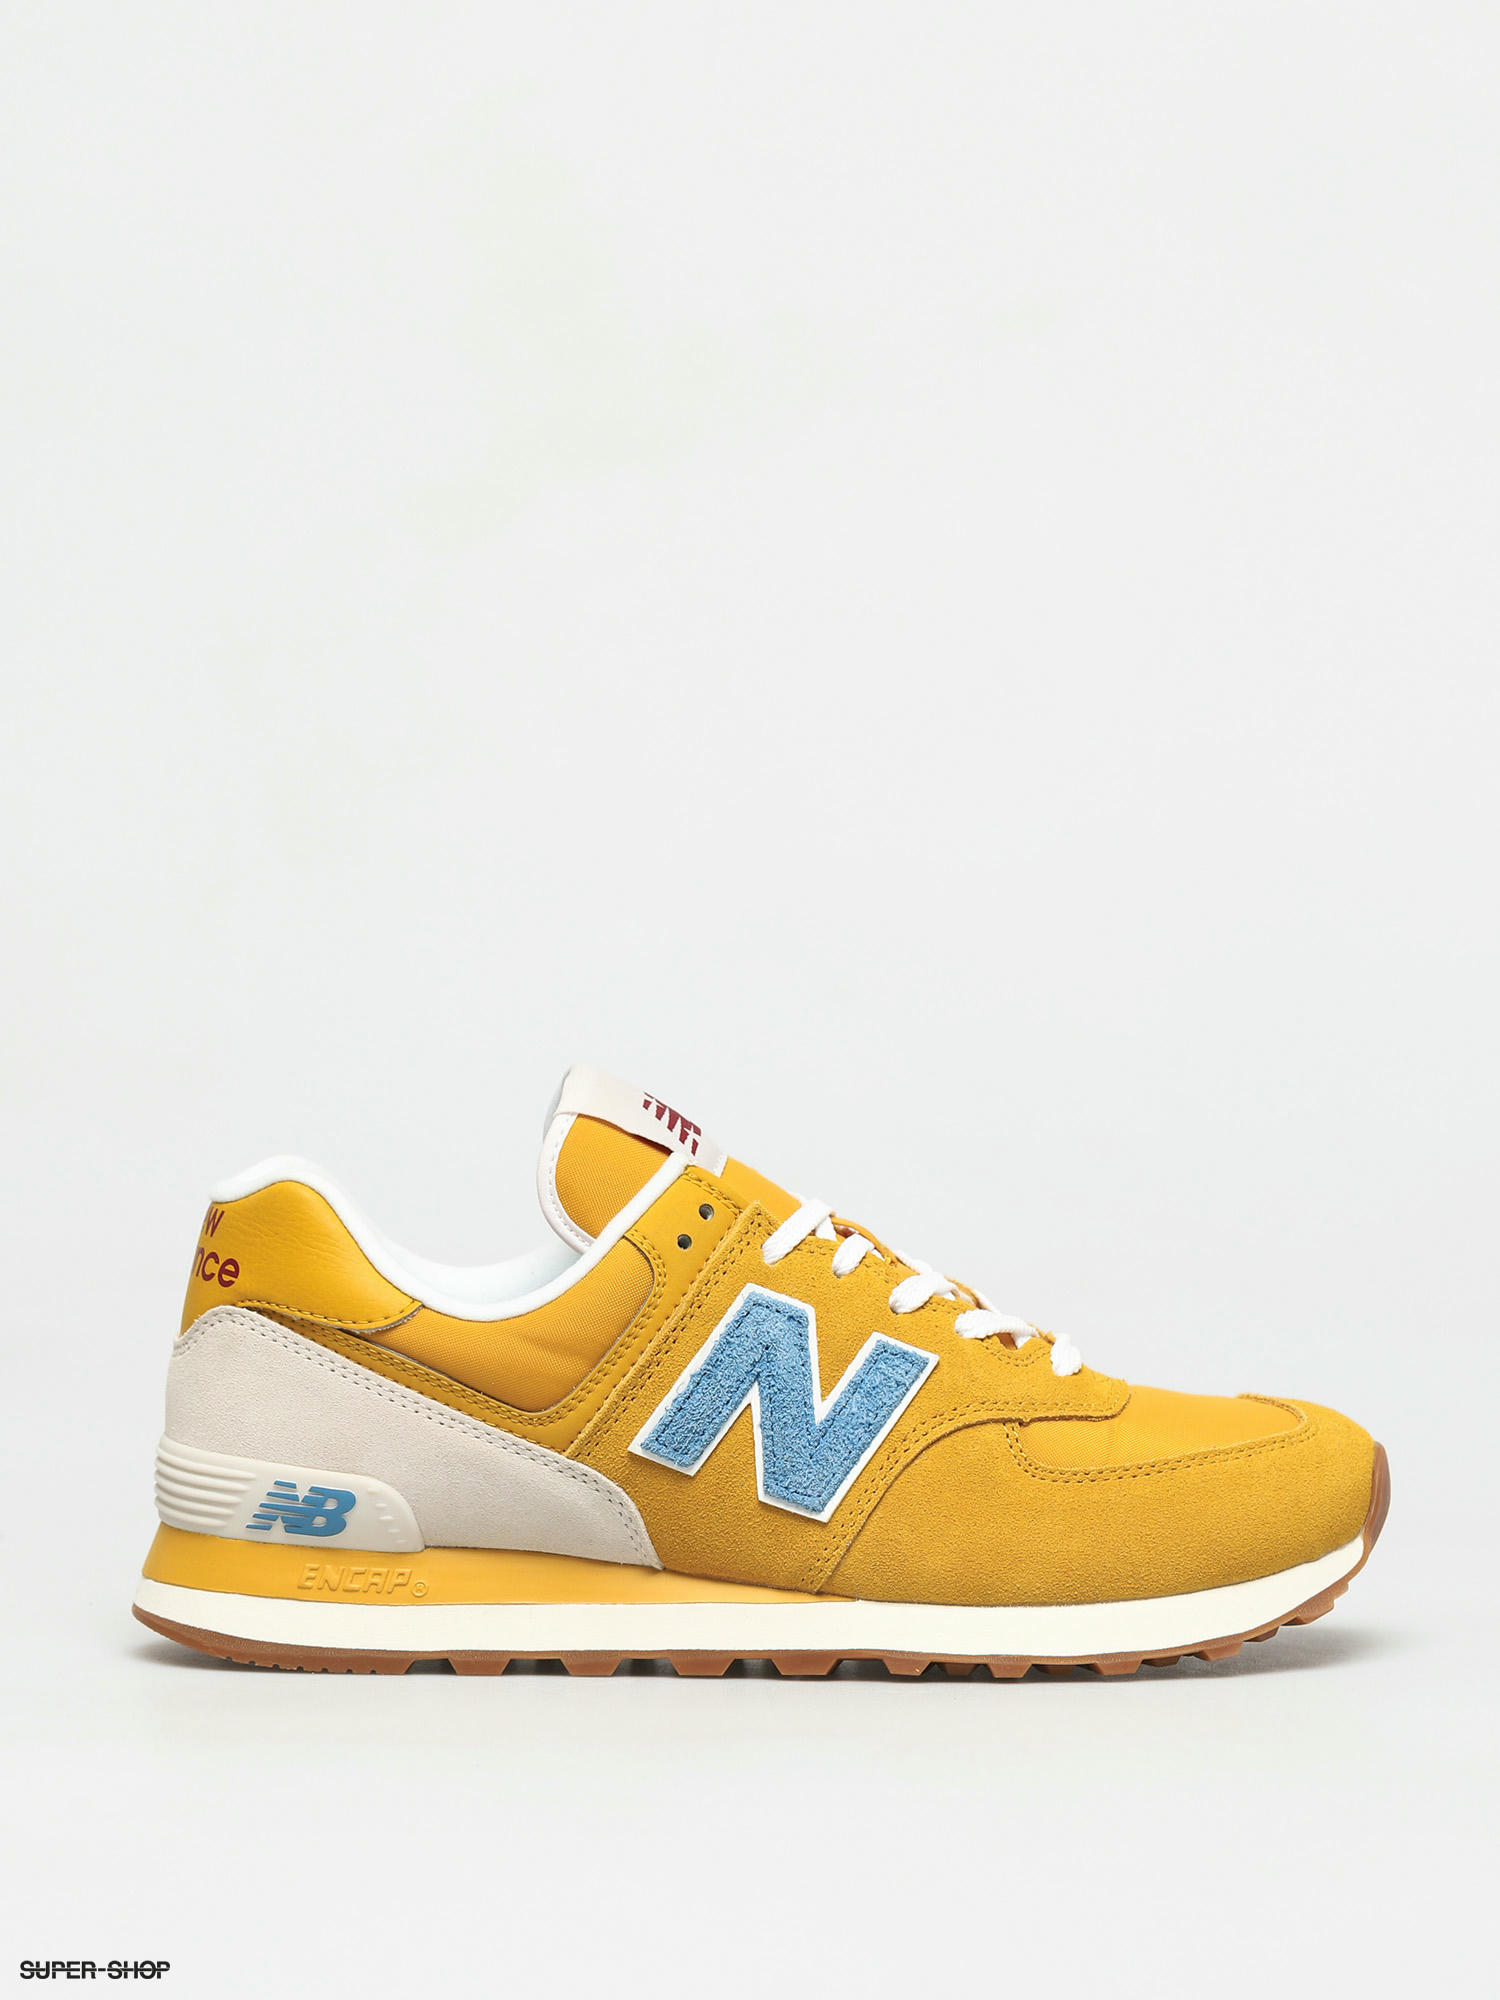 new balance 574 navy blue and yellow